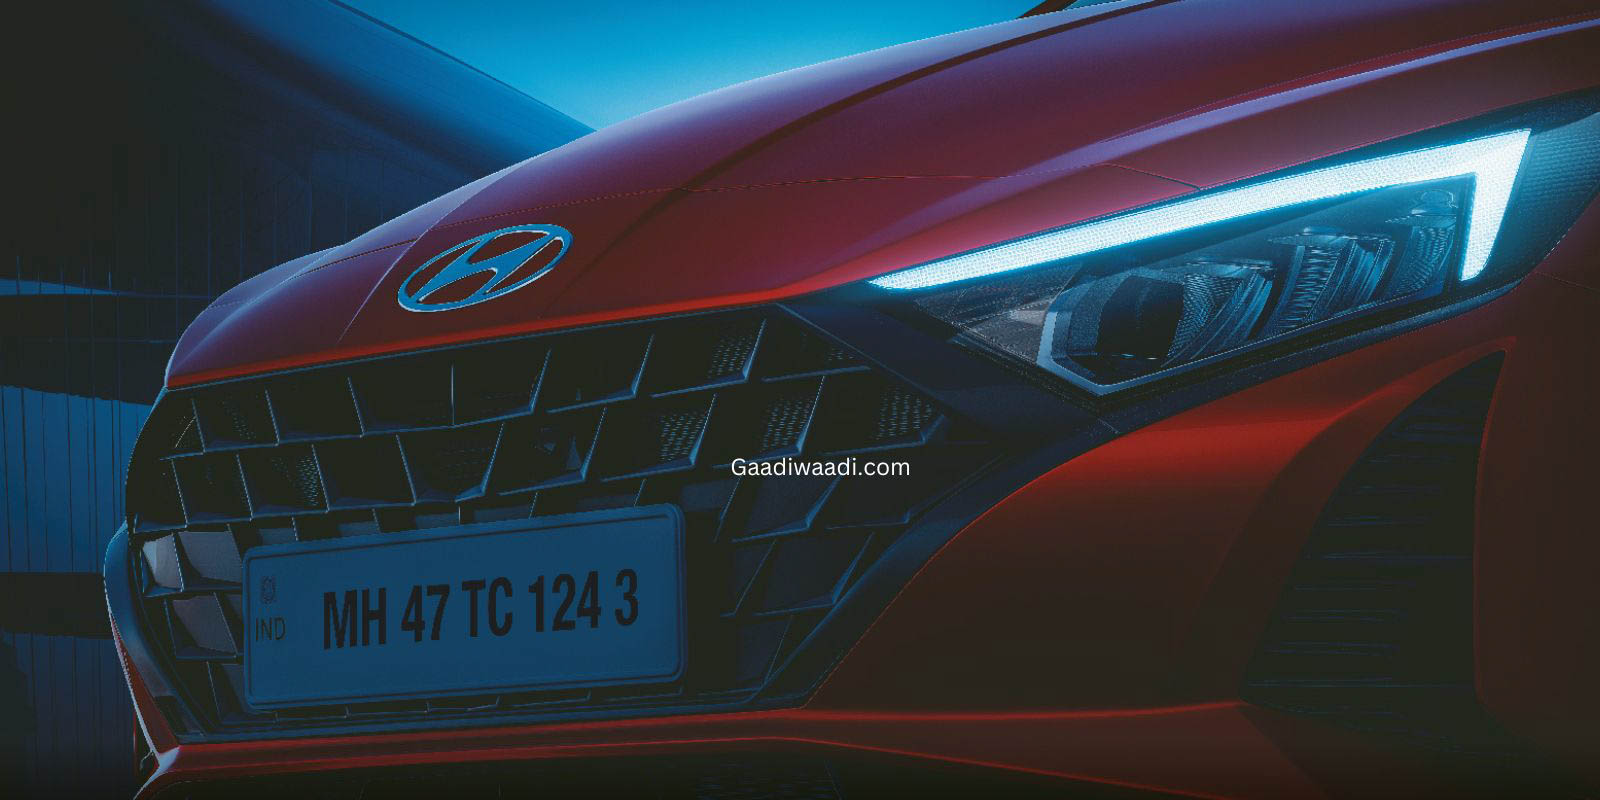 2023 Hyundai i20 Facelift Teased For The First Time, Launch Soon